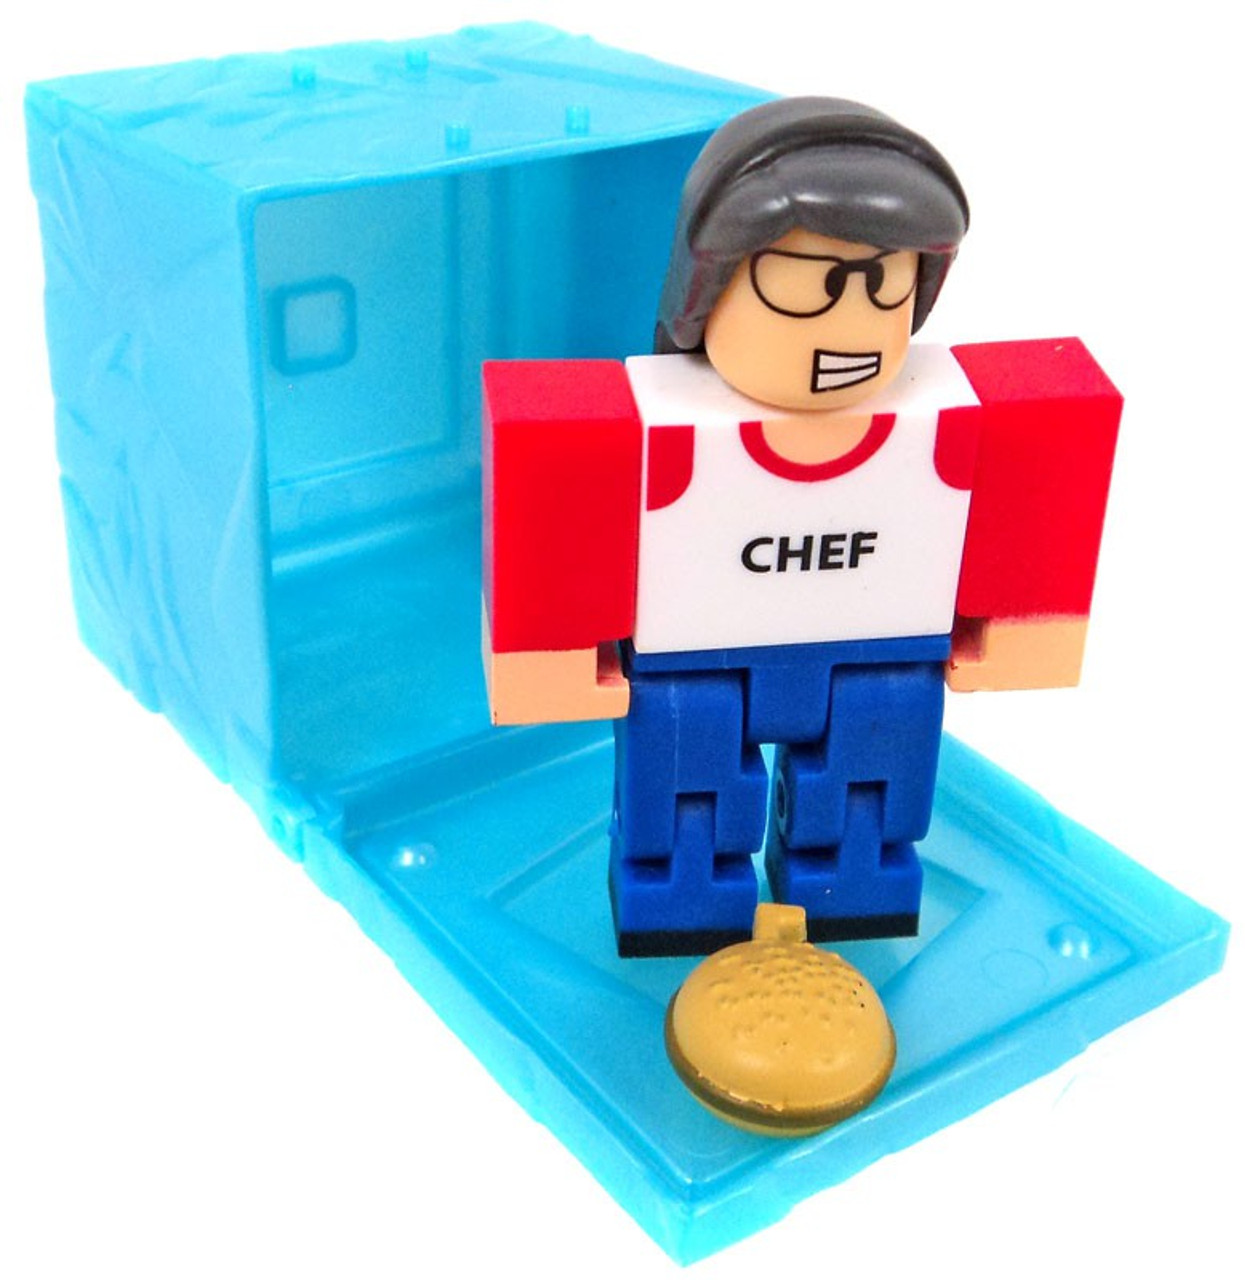 Roblox Red Series 3 High School Life Lunch Lady 3 Mini Figure Blue Cube With Online Code Loose Jazwares Toywiz - hexaria rogue roblox mini figure w virtual game code